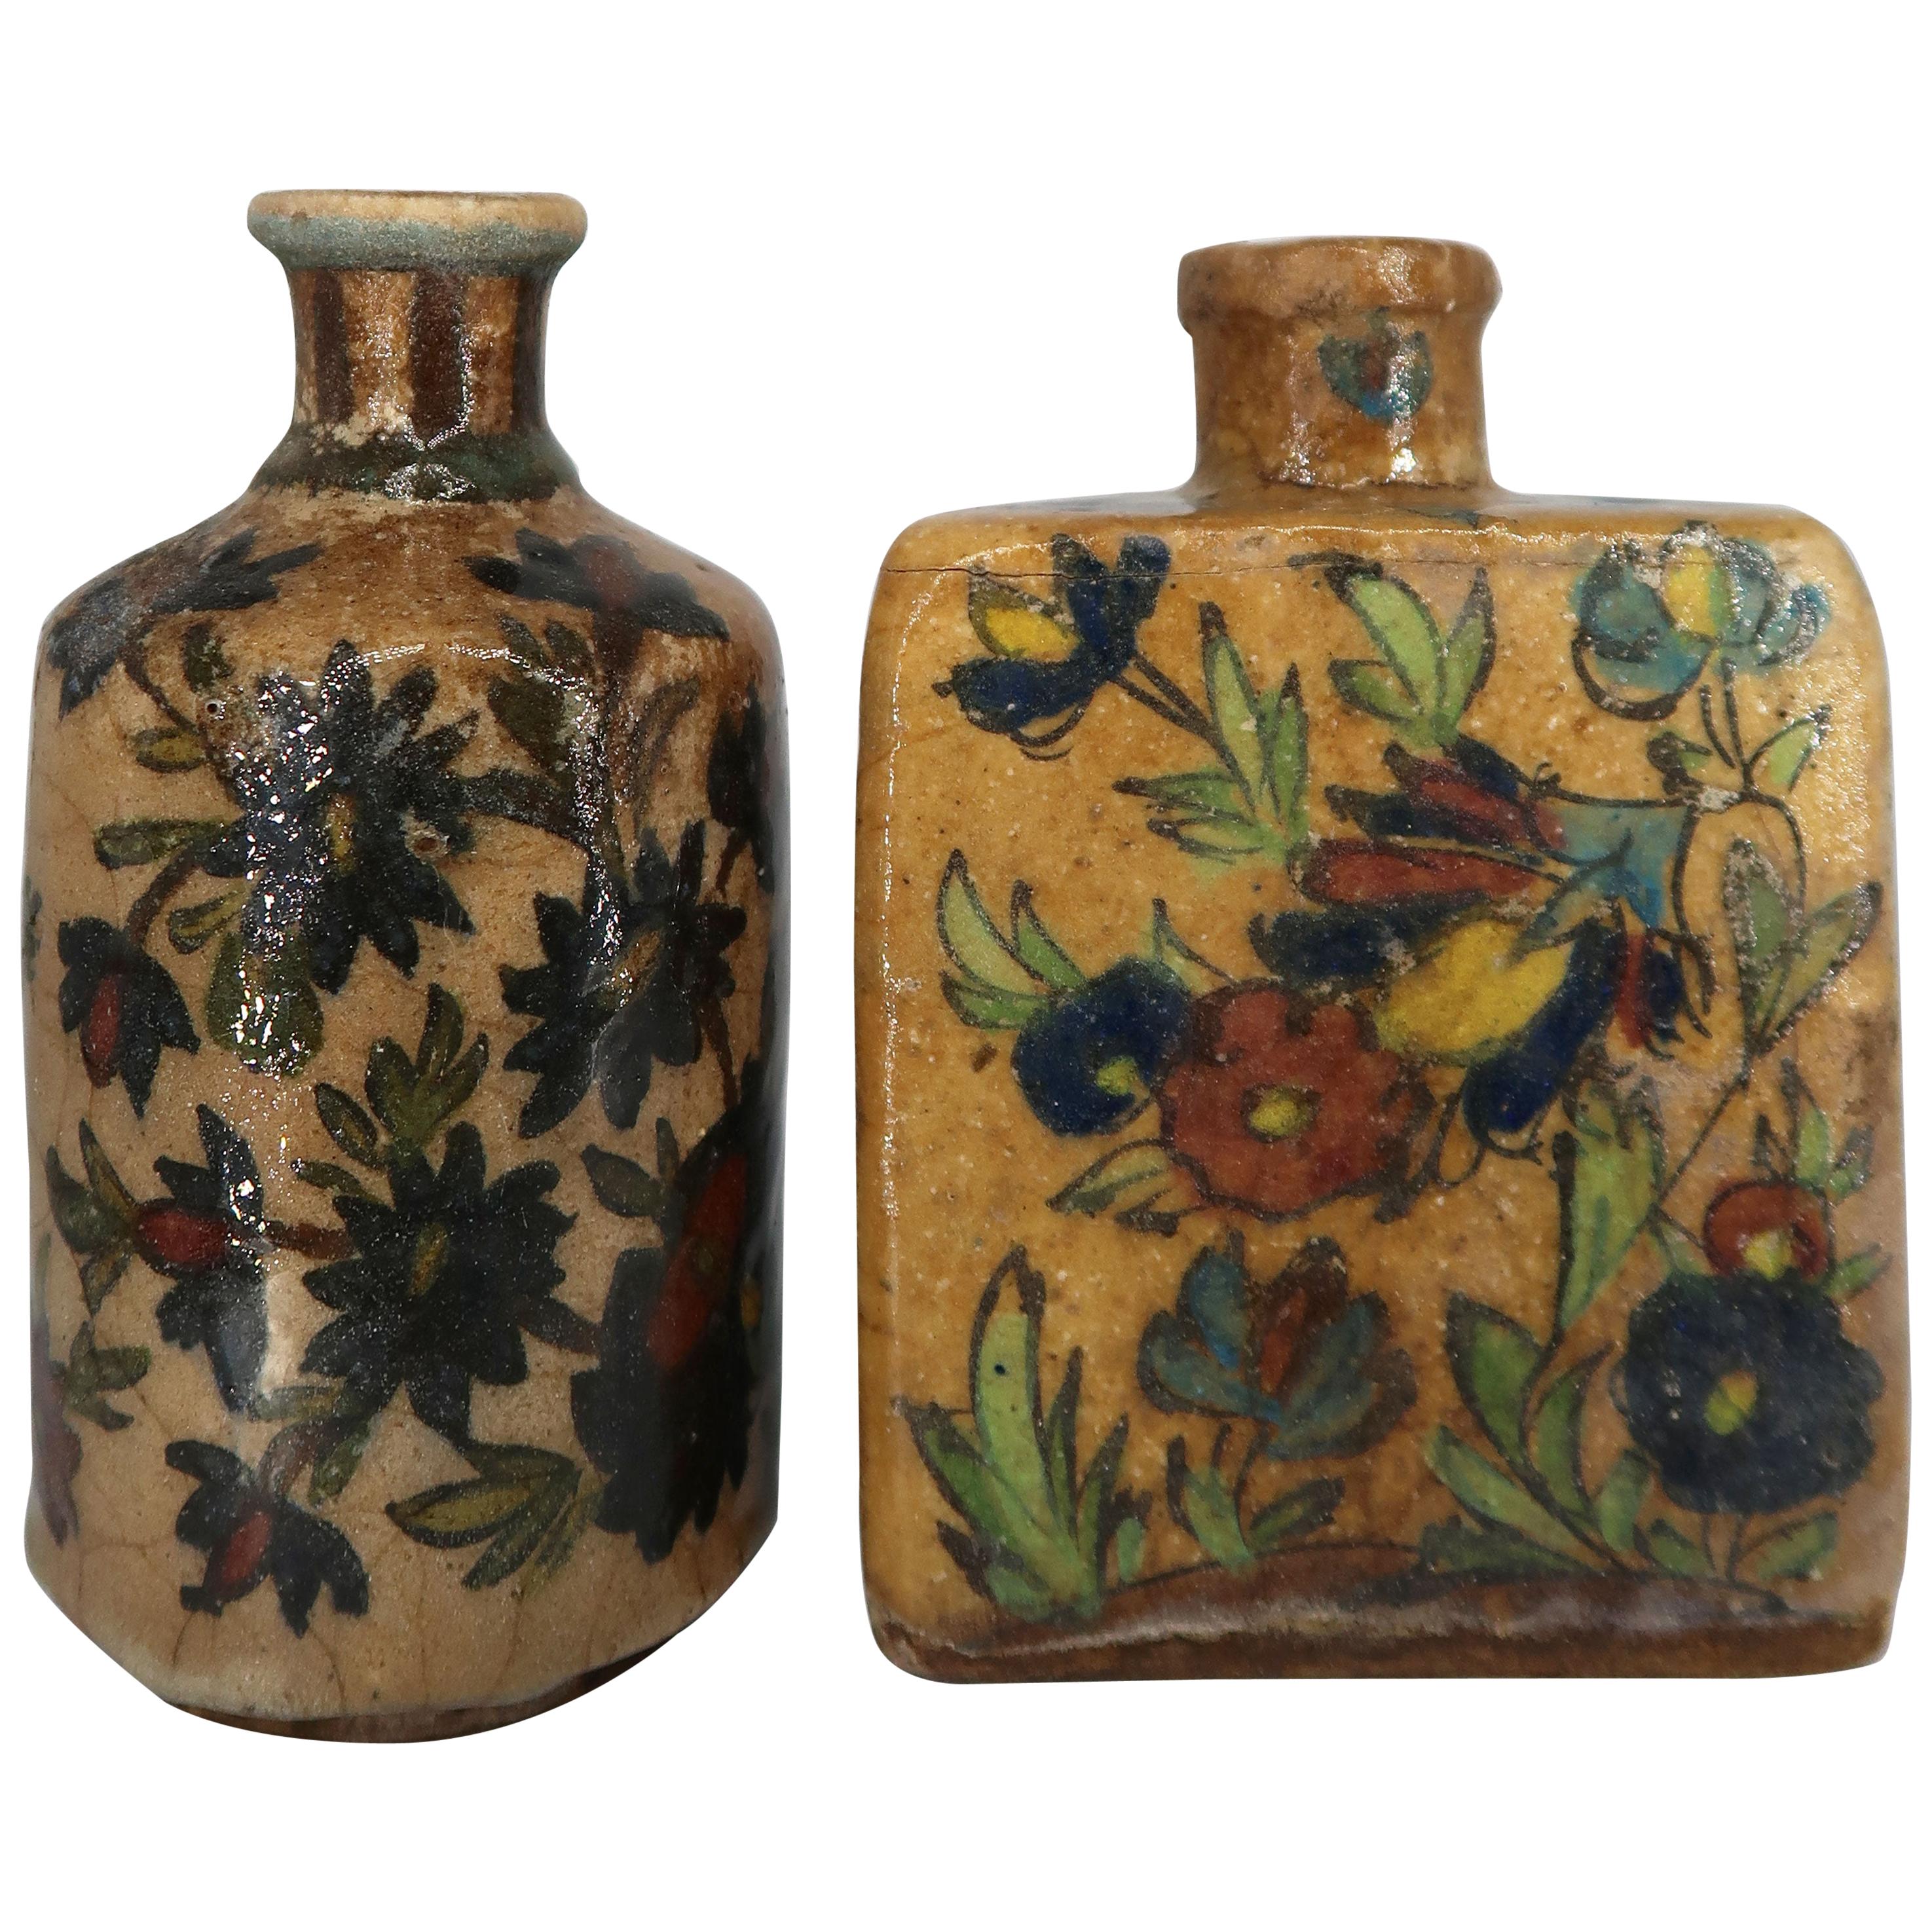 Pair of Authentic Antique Persian Qajar Pottery Tea Flasks, Late 19th Century